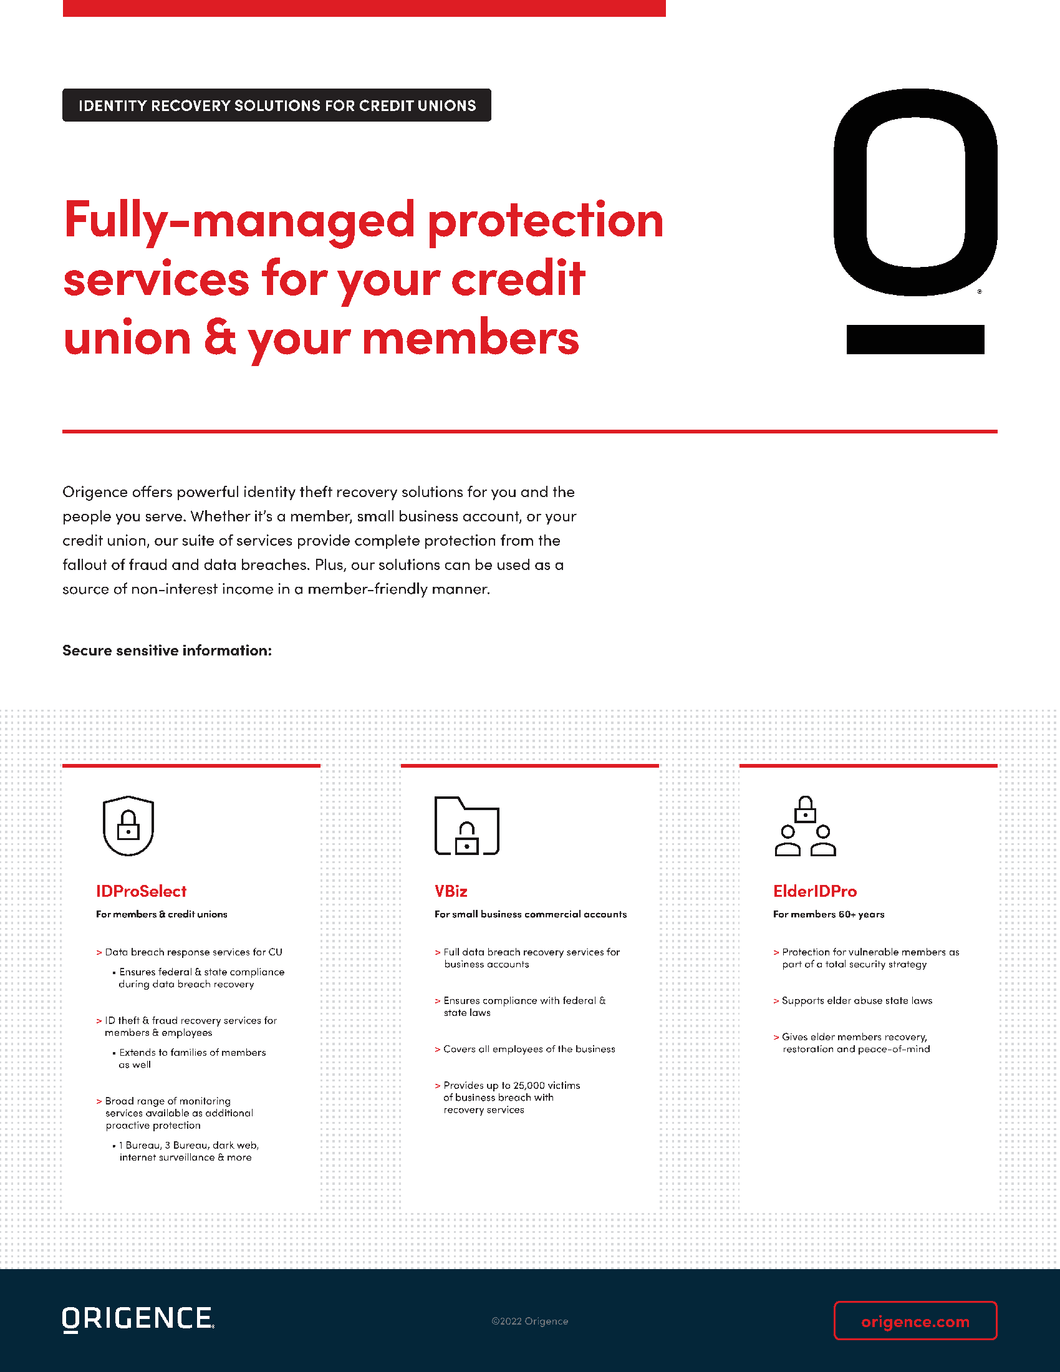 Identity Solutions Sales Sheet (Credit Unions)